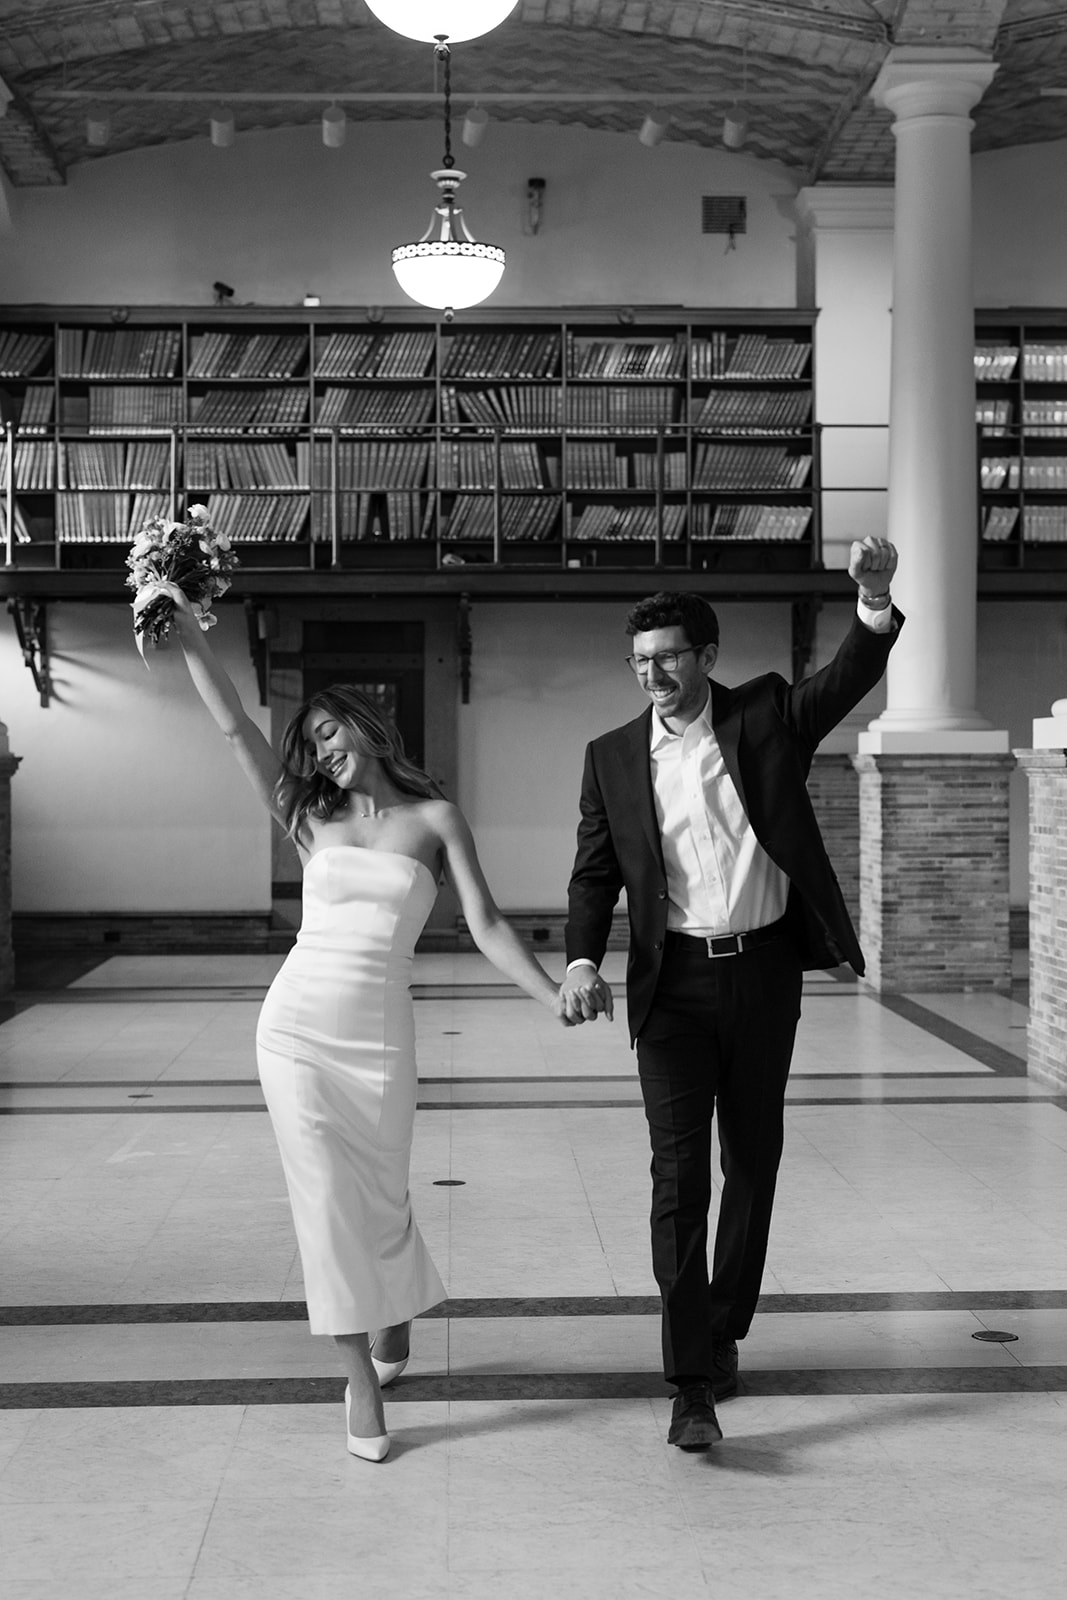 Stunning couple pose in the Boston public library after their dreamy winter elopement